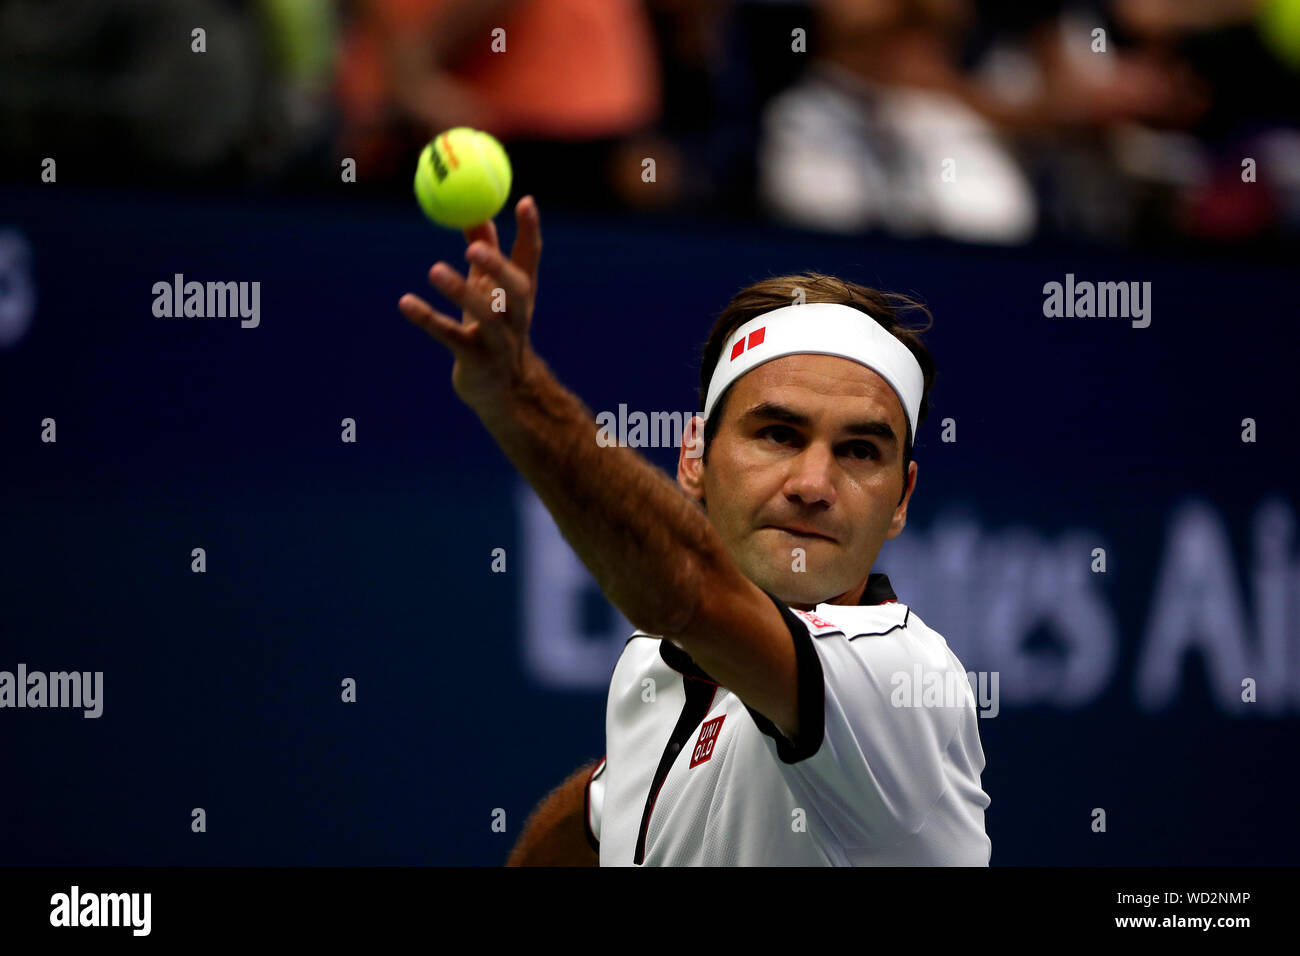 Roger Federer Age High Resolution Stock Photography and Images - Alamy